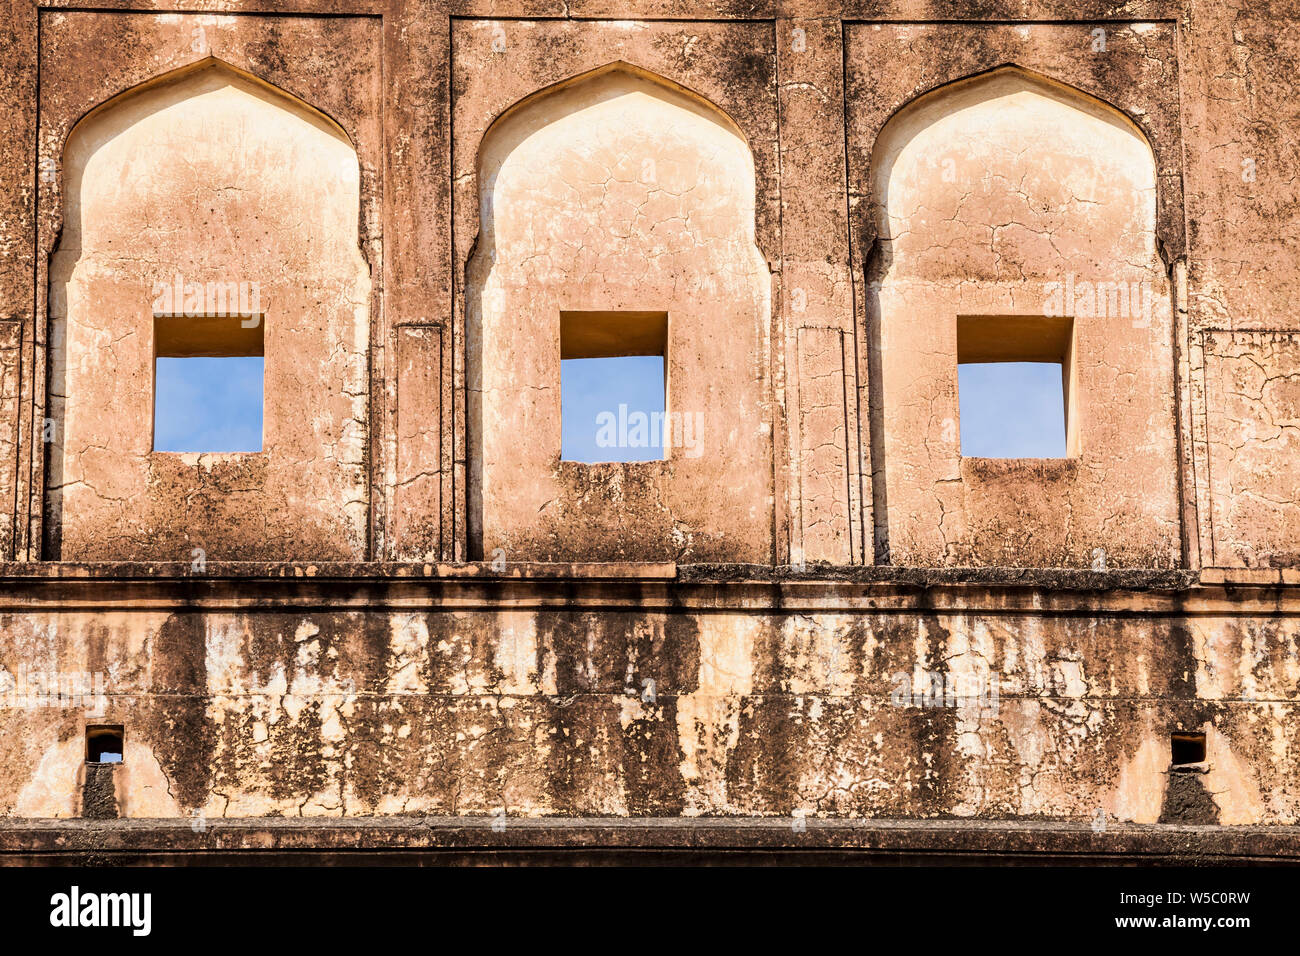 Architectural details of Amer Palace / fort. Amer, India, near Jaipur, Rajasthan, India. Stock Photo